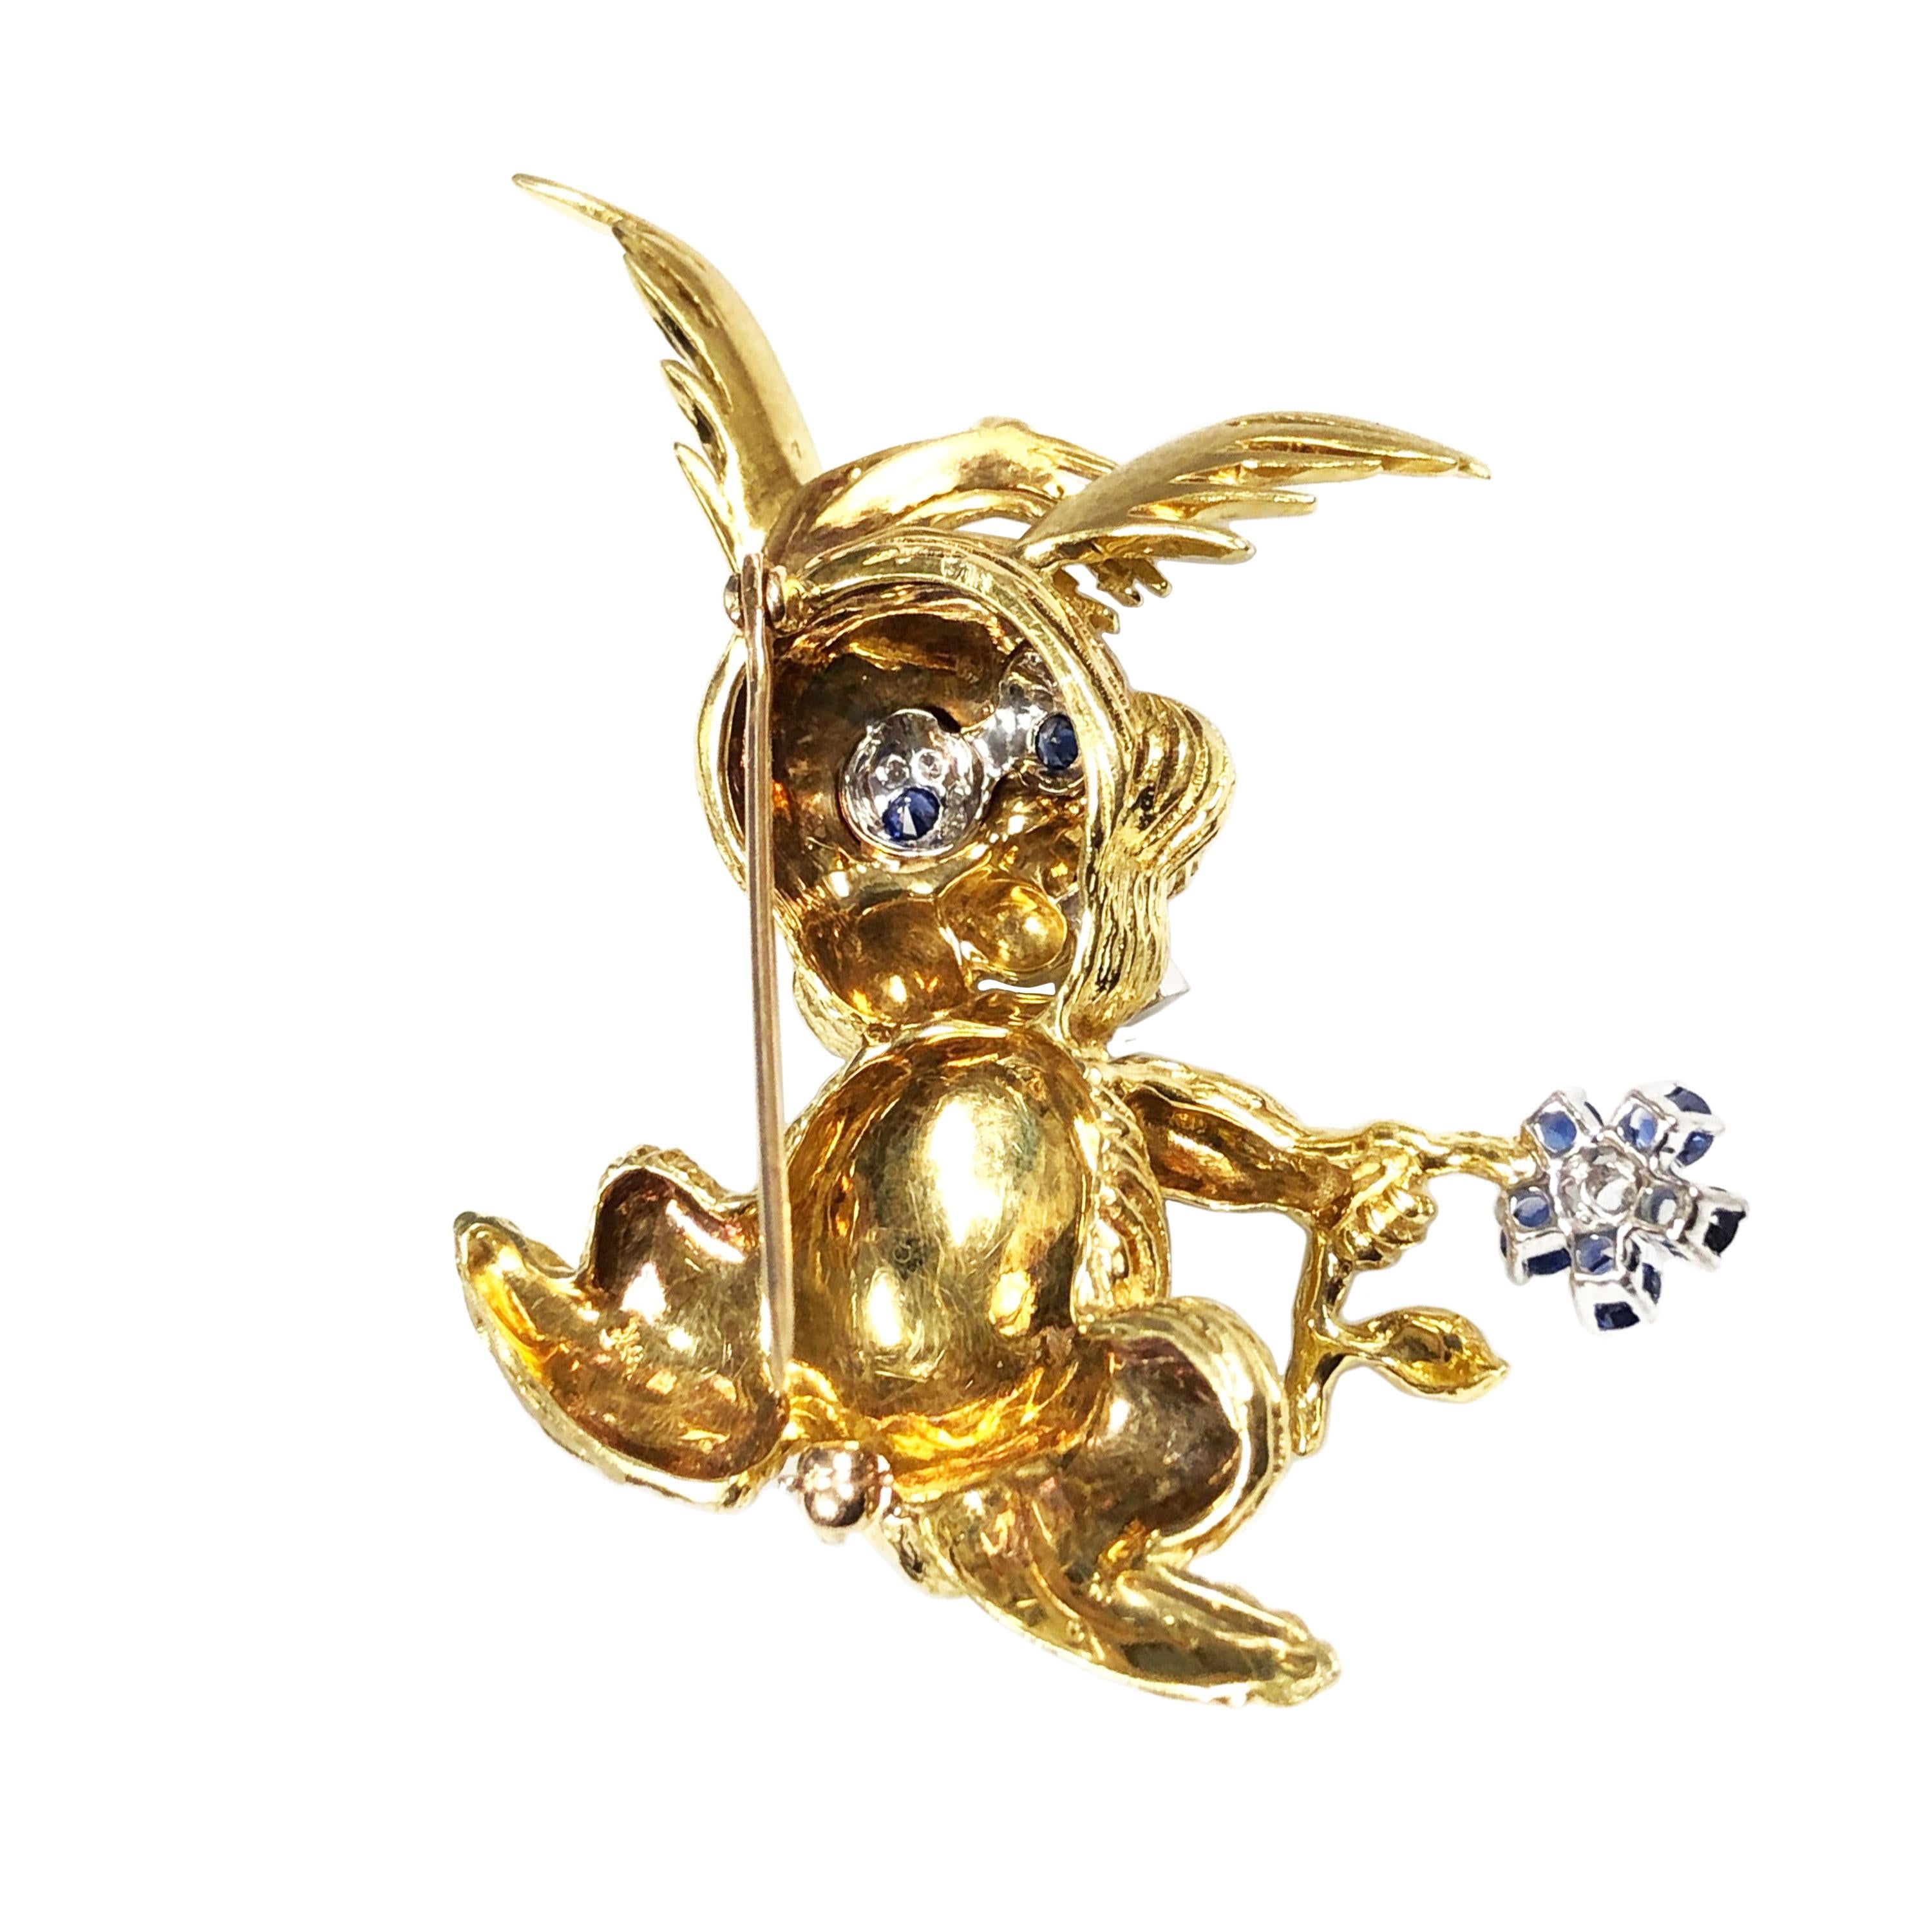 Circa 1970 18k yellow Gold Whimsical Bunny Rabbit Brooch, measuring 2 inches in length X 2 inches wide and weighing 29.7 Grams. Extremely well made, very nicely detailed and Having Sapphire and Diamond Eyes, a Ruby Nose, Diamond Tooth and holding a